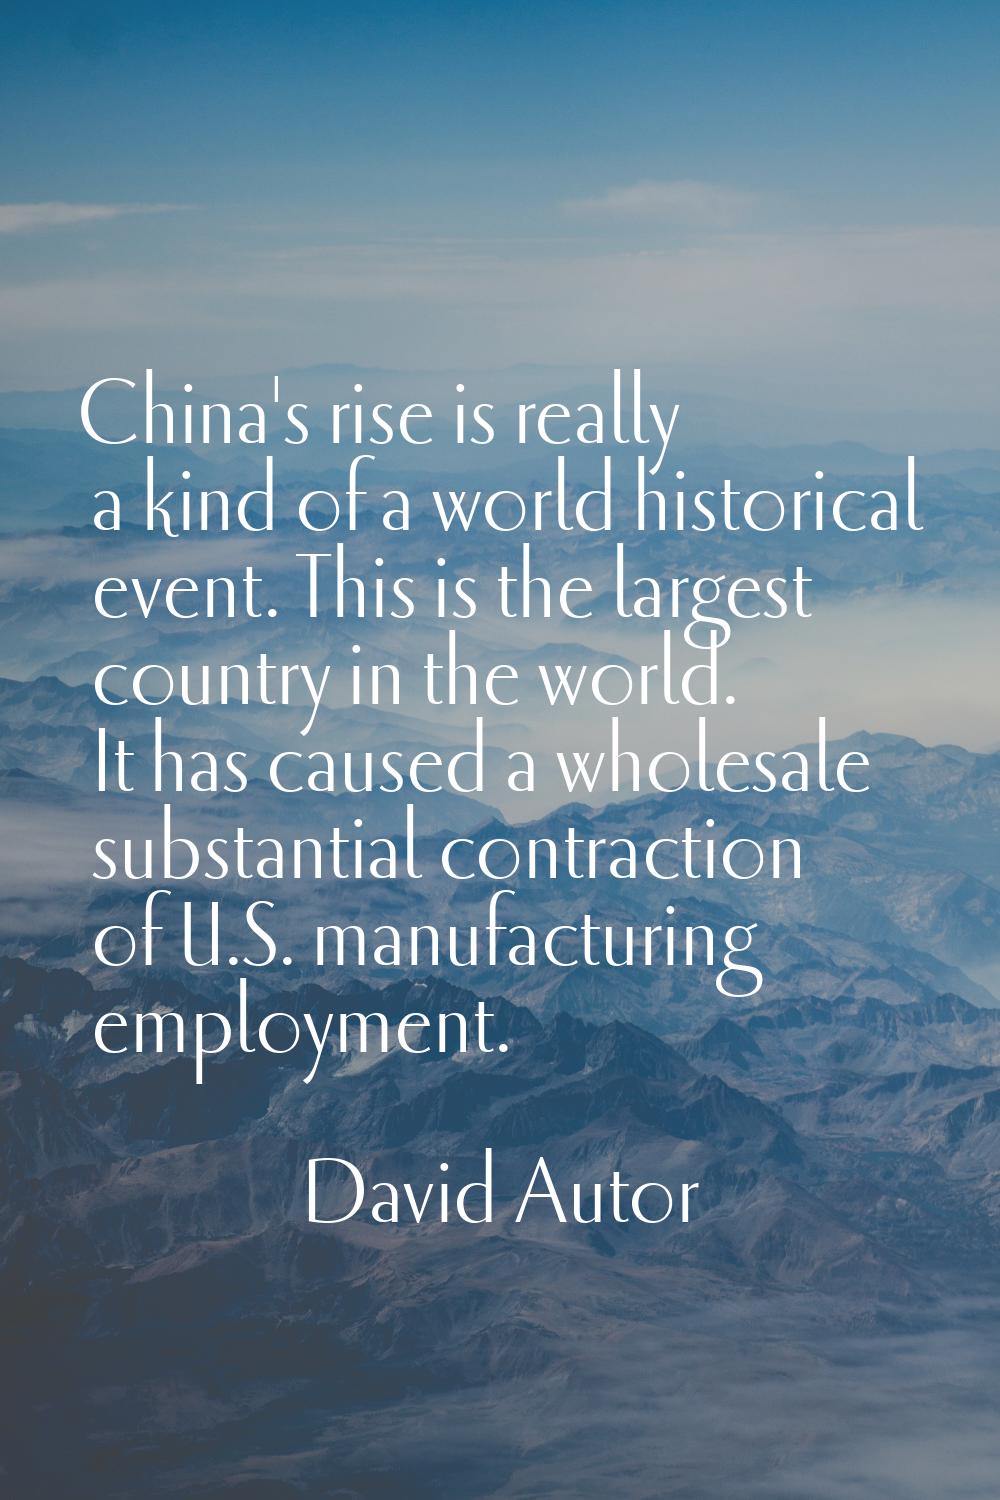 China's rise is really a kind of a world historical event. This is the largest country in the world